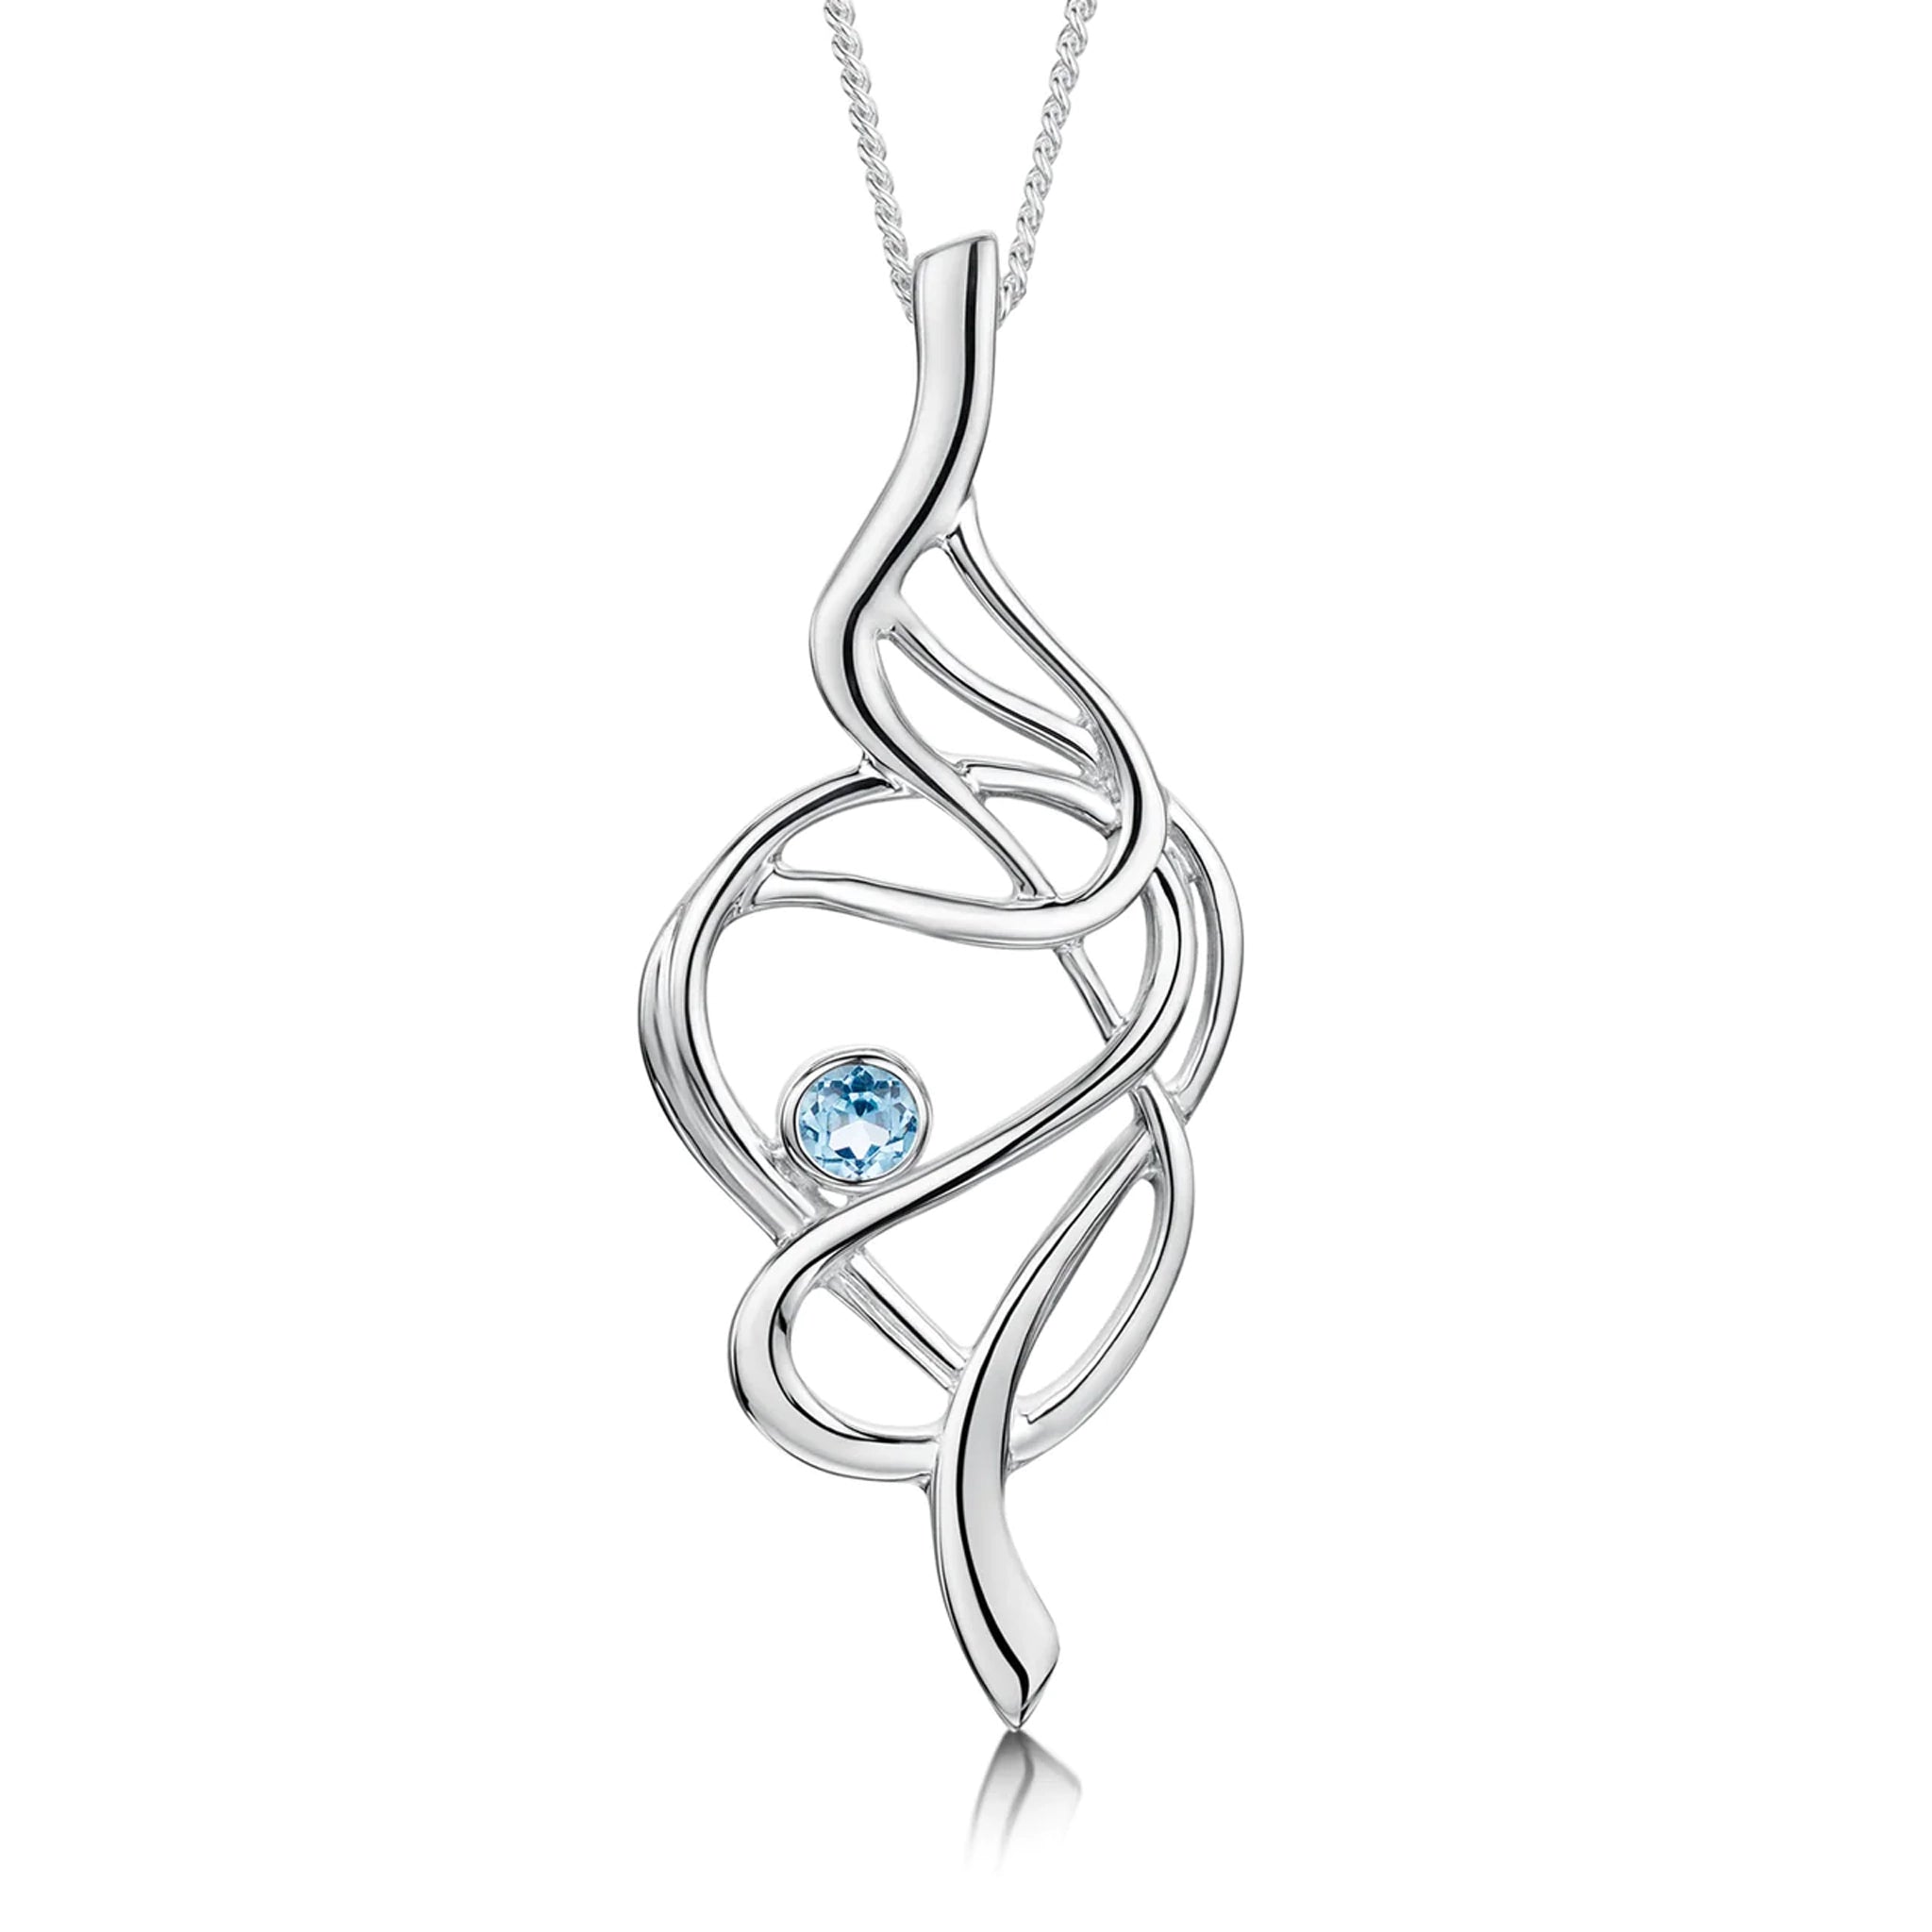 Large silver pendant with abstract loose knot design and round blue topaz stone on a silver chain